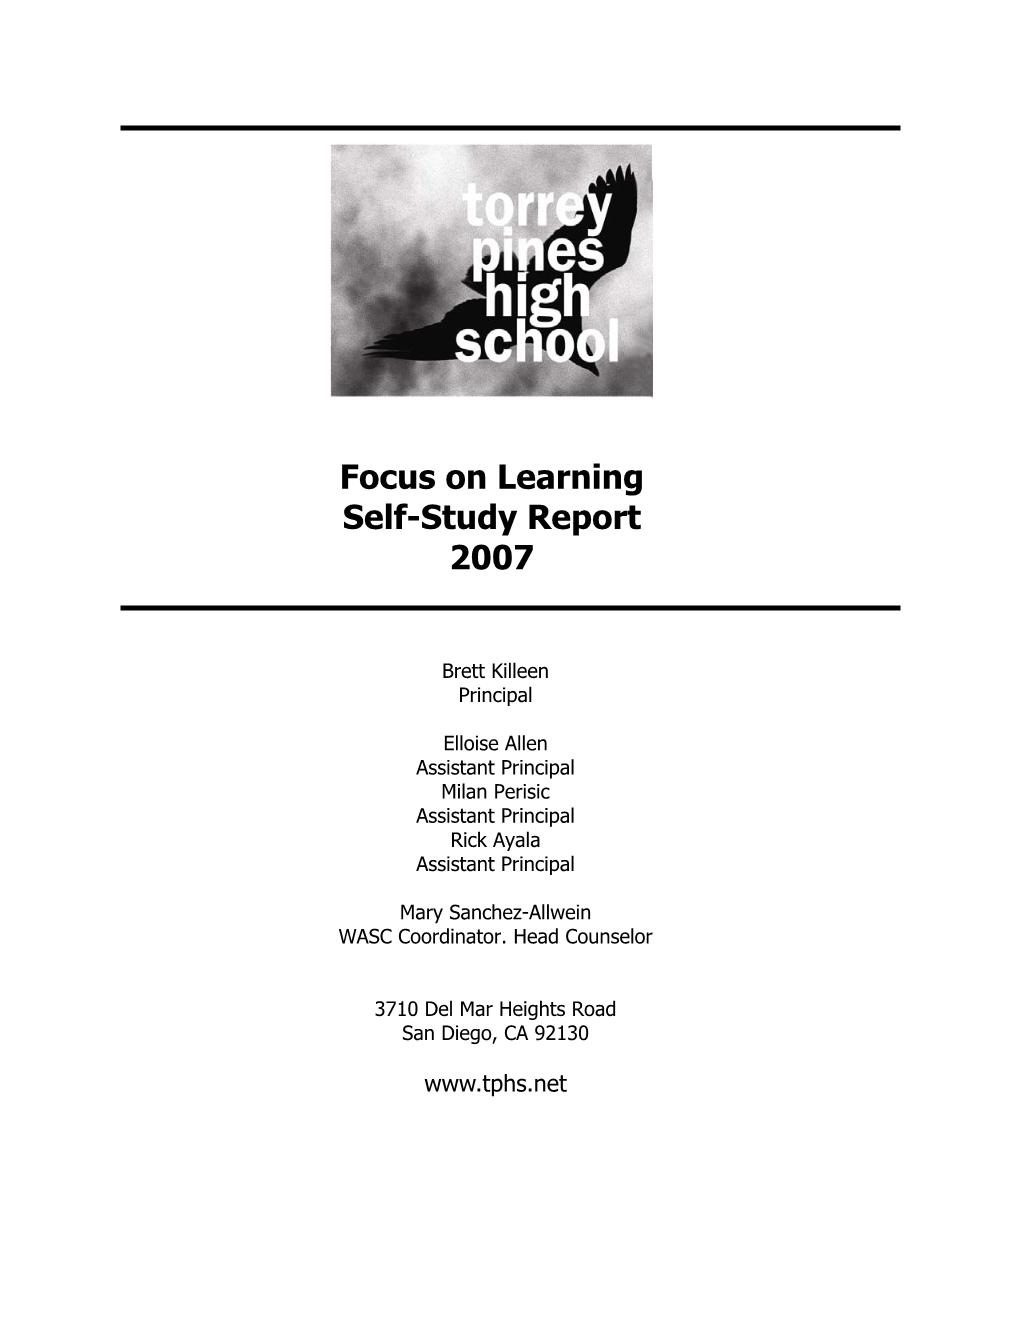 Focus on Learning Self-Study Report 2007